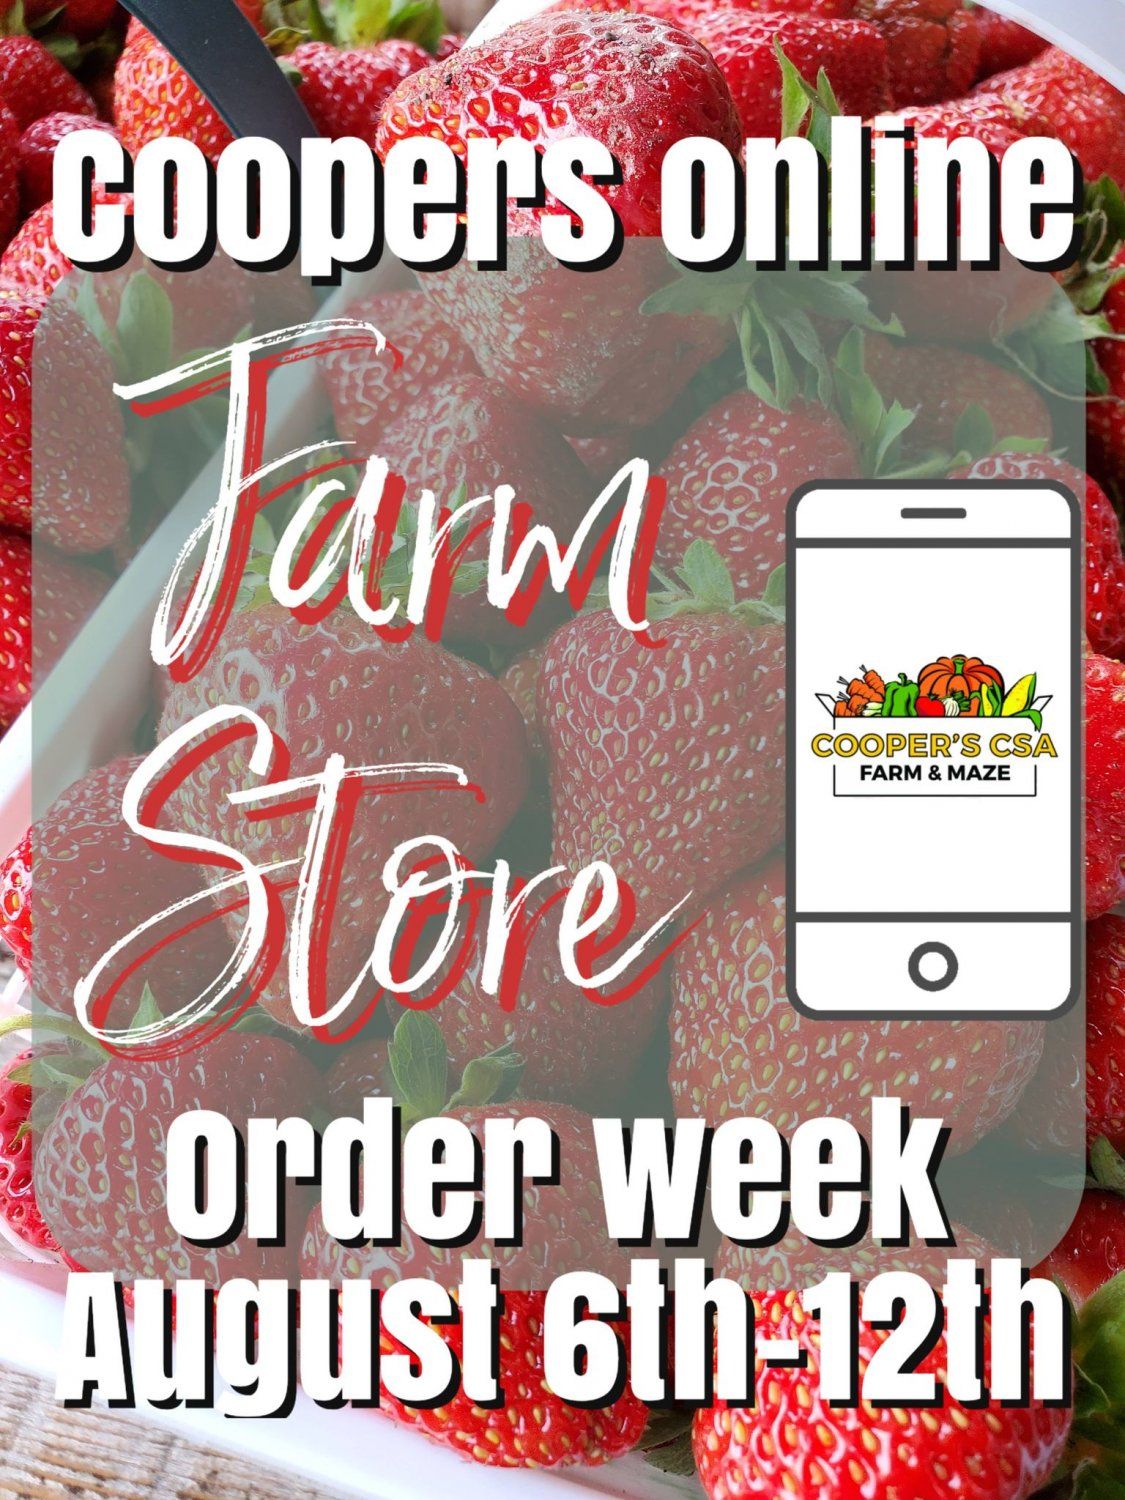 Previous Happening: Coopers Online Farm Stand-Order Week August 6th-12th